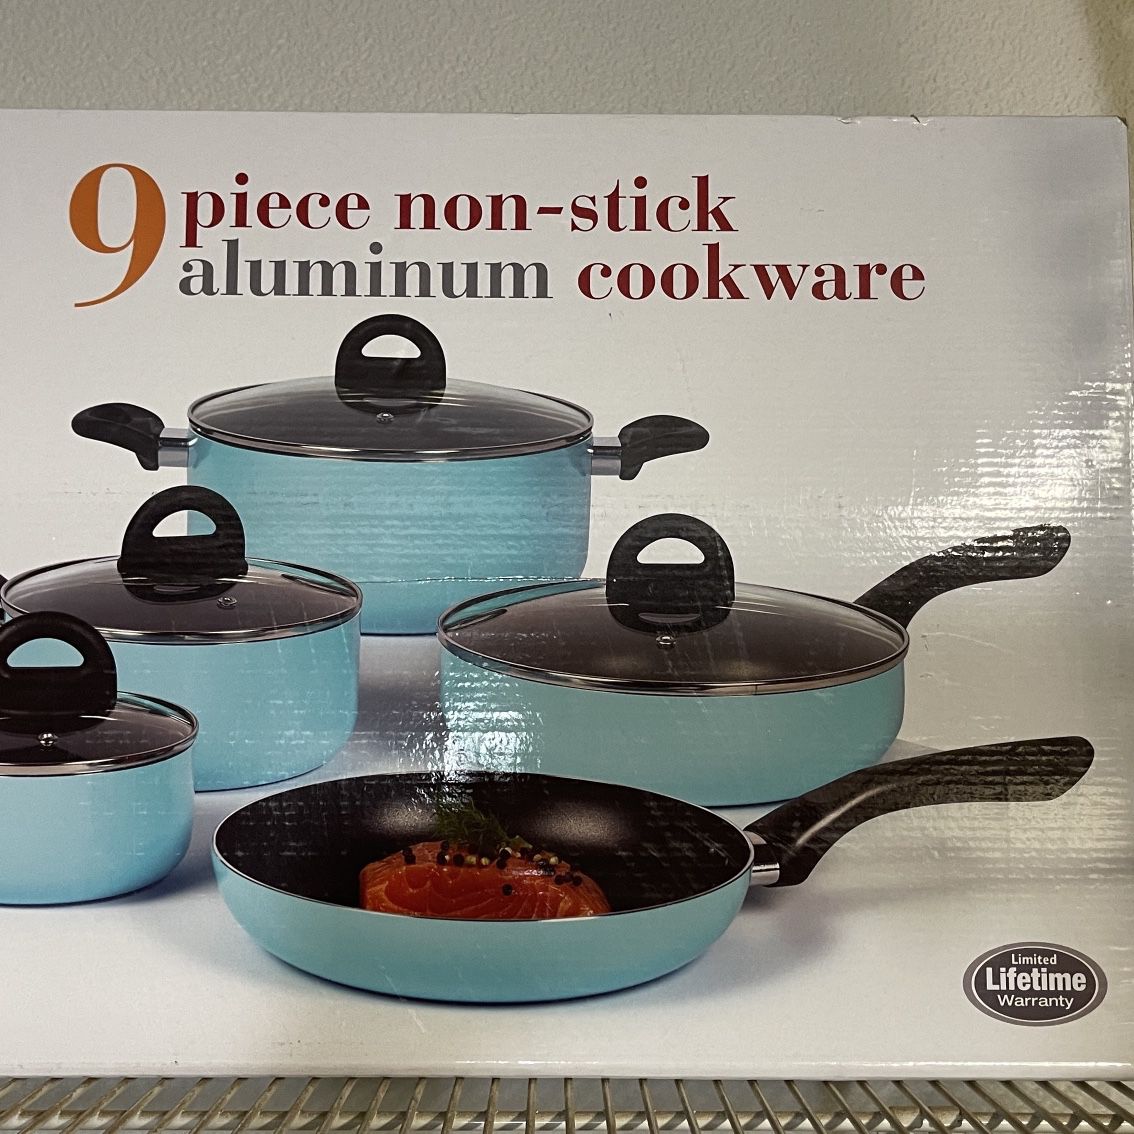 10 piece Bialetti cookware set for Sale in Alhambra, CA - OfferUp